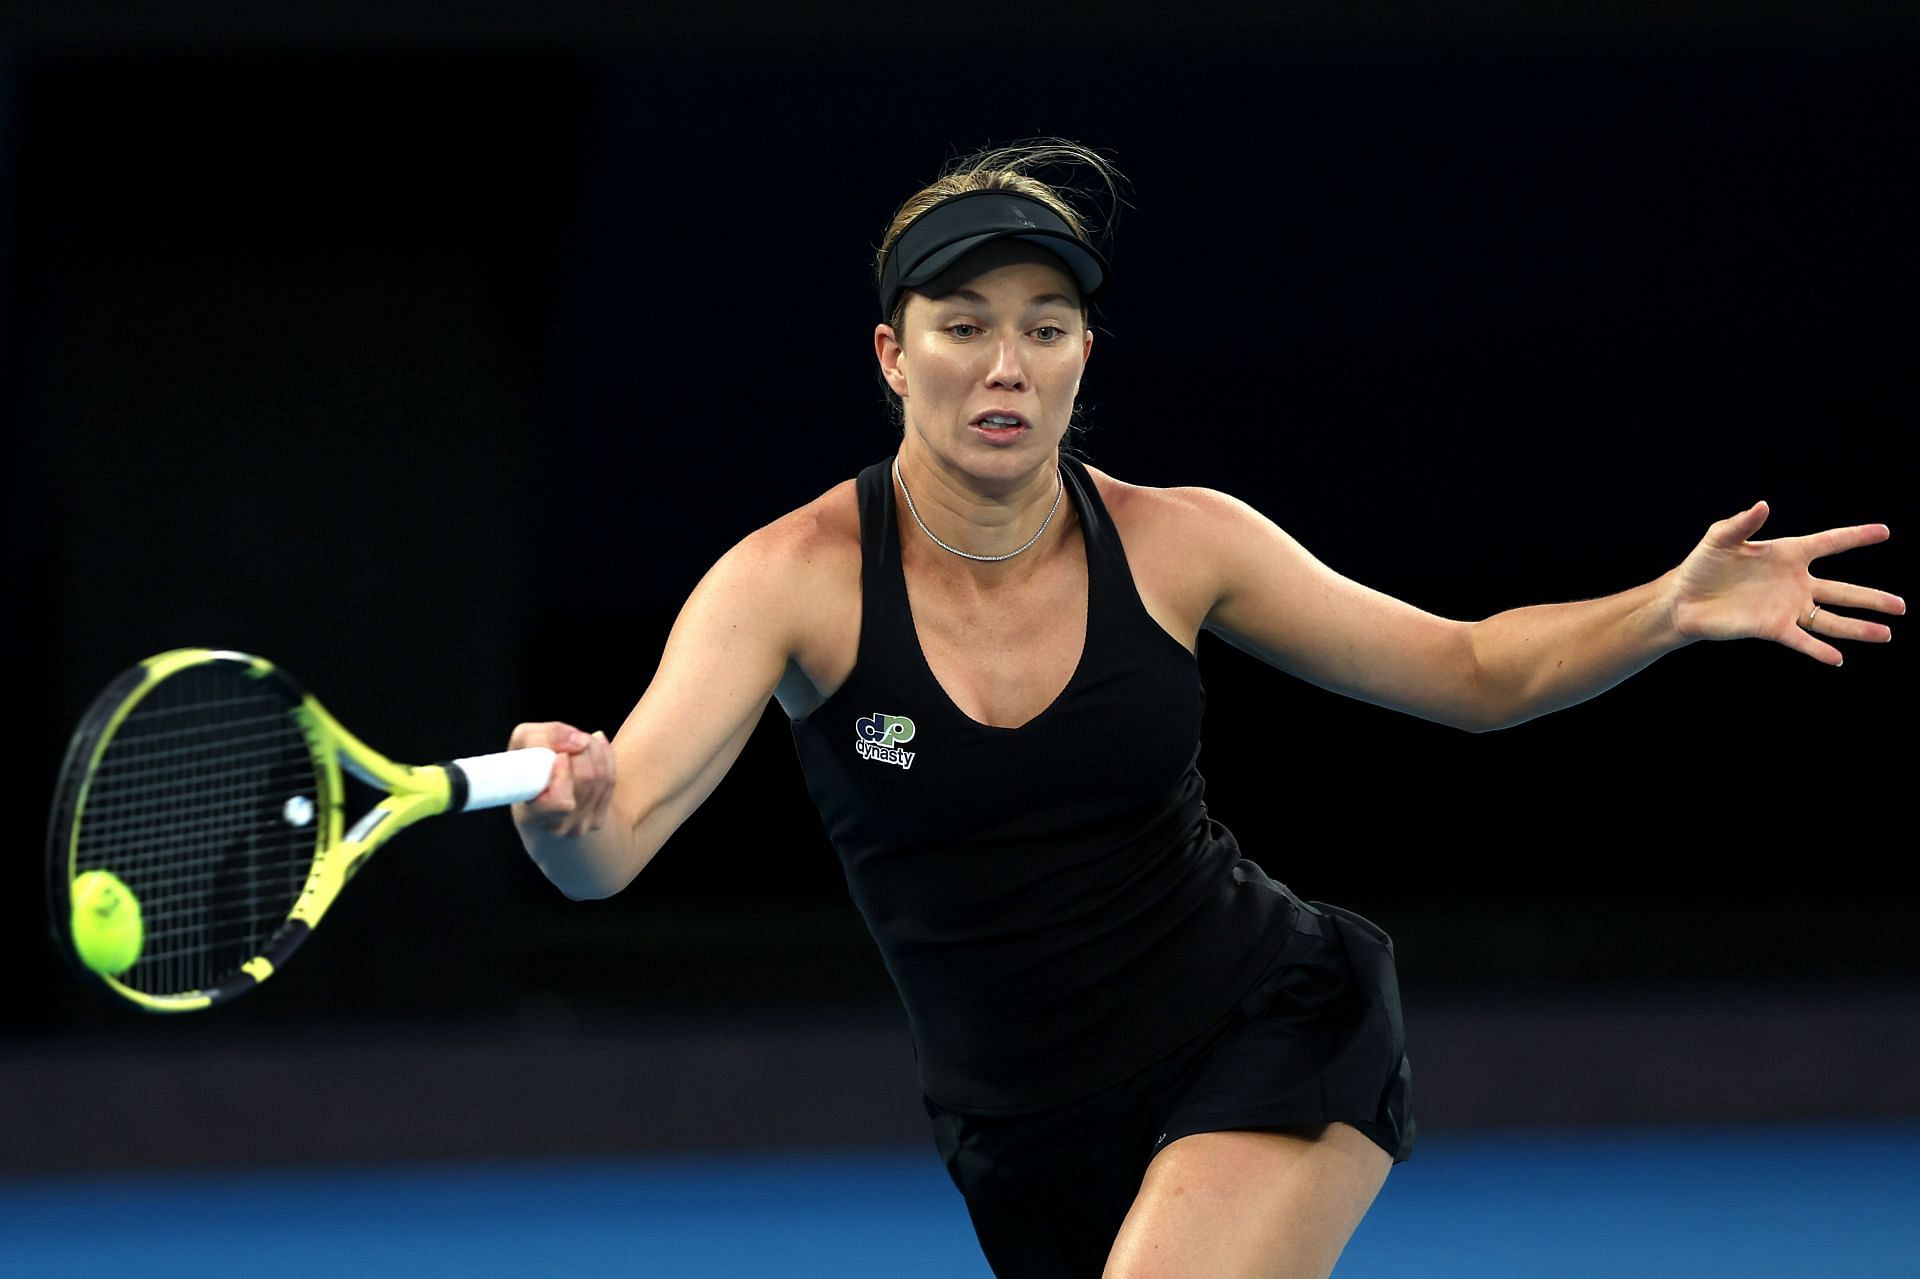 Danielle Collins reached the final of the Australian Open this year